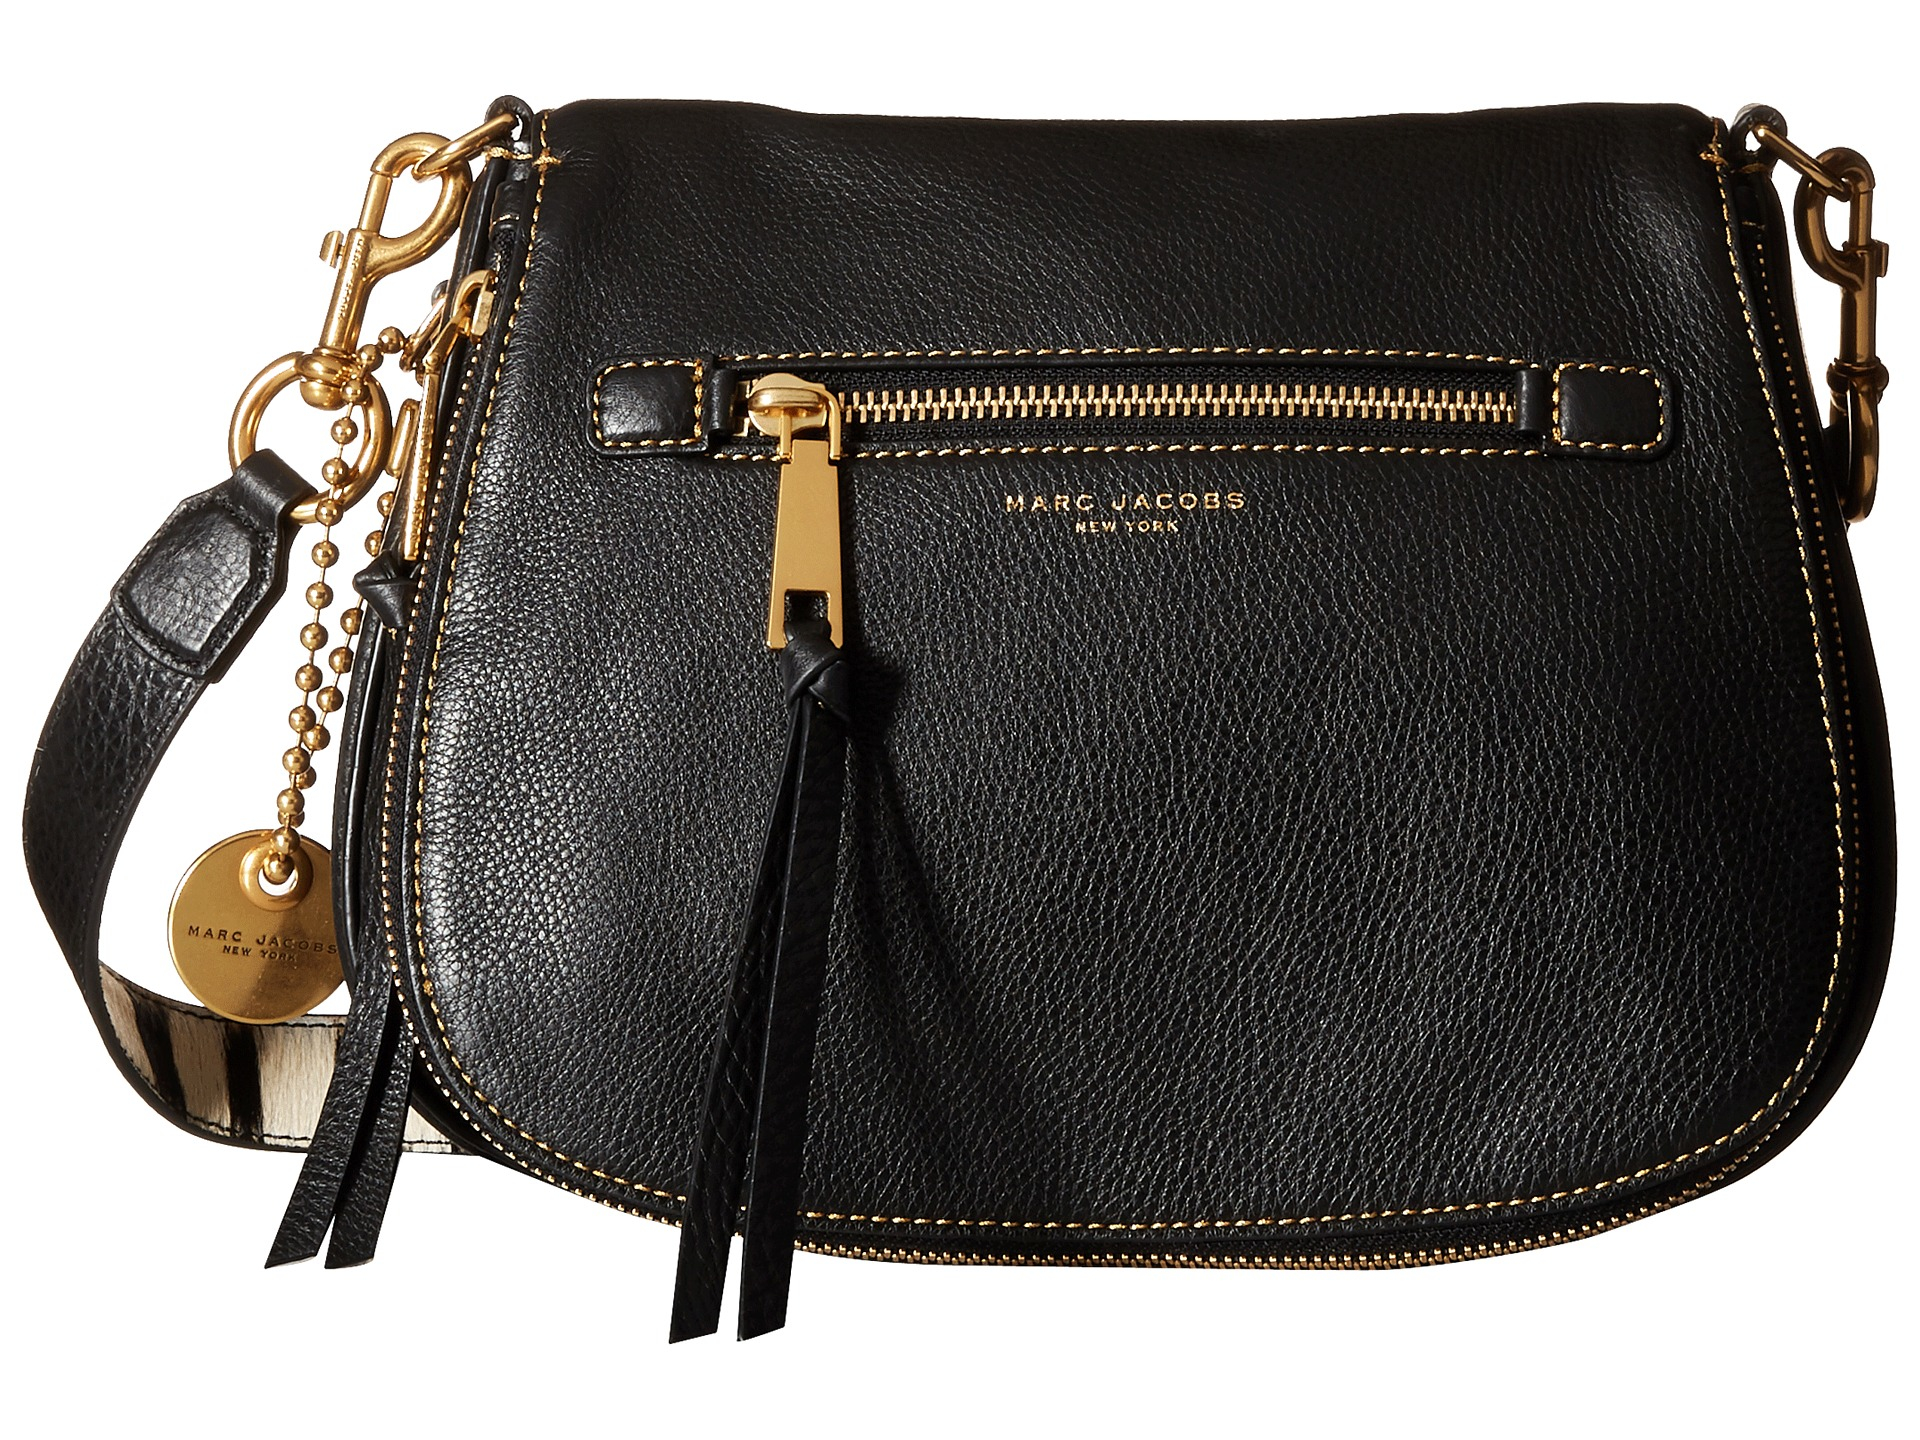 Lyst - Marc Jacobs Recruit With Guitar Strap Saddle Bag in Black